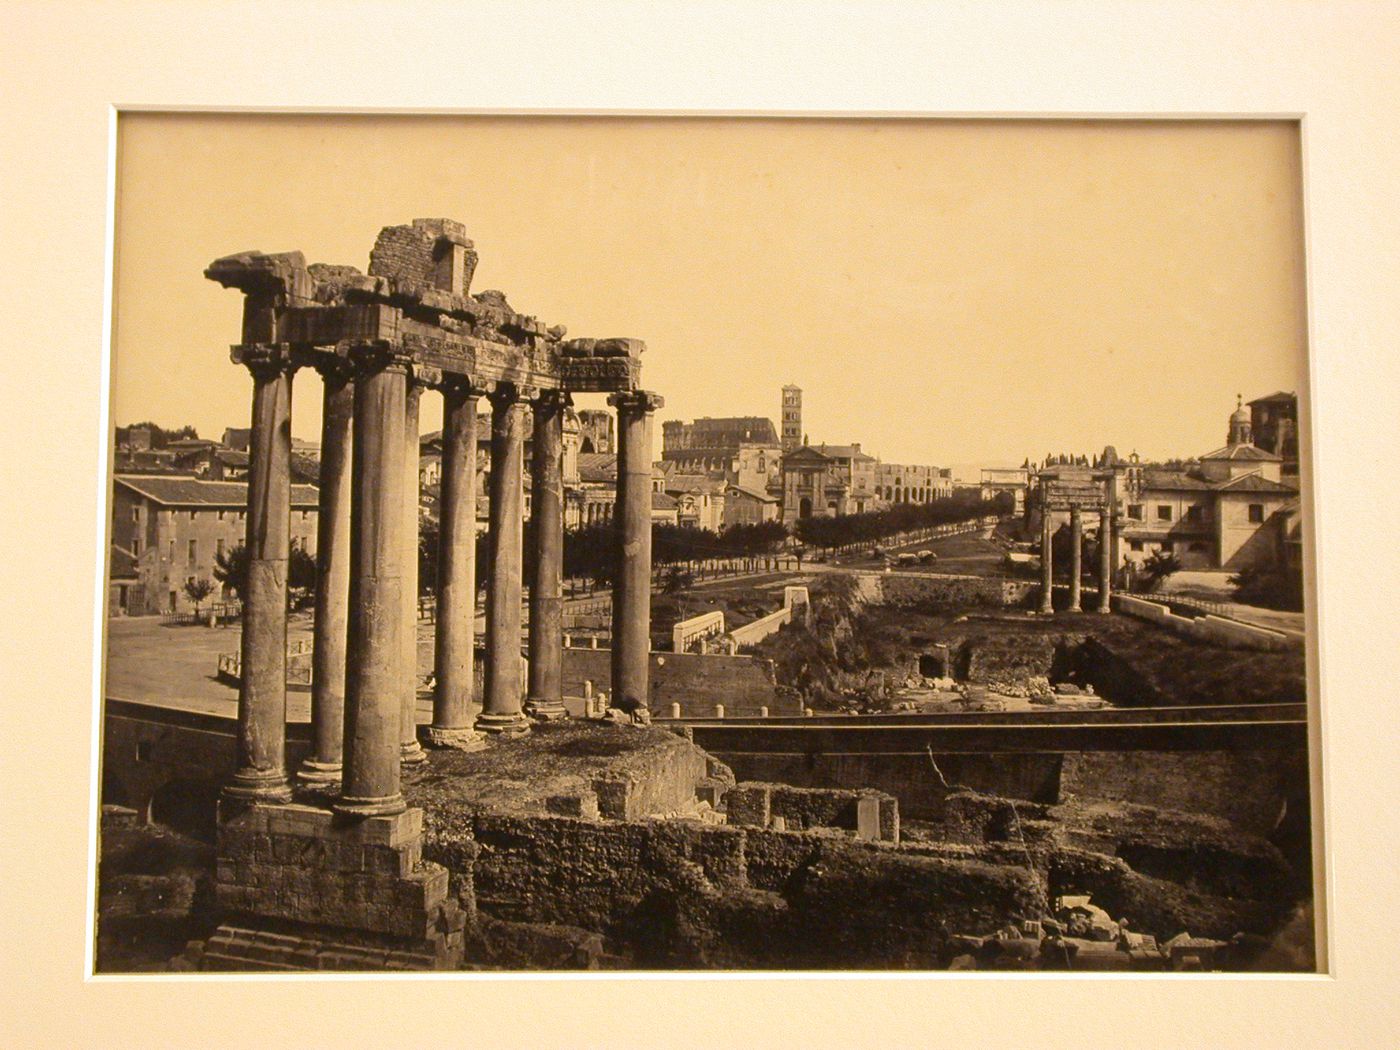 Forum with Temple of Saturn, foreground, Rome, Italy